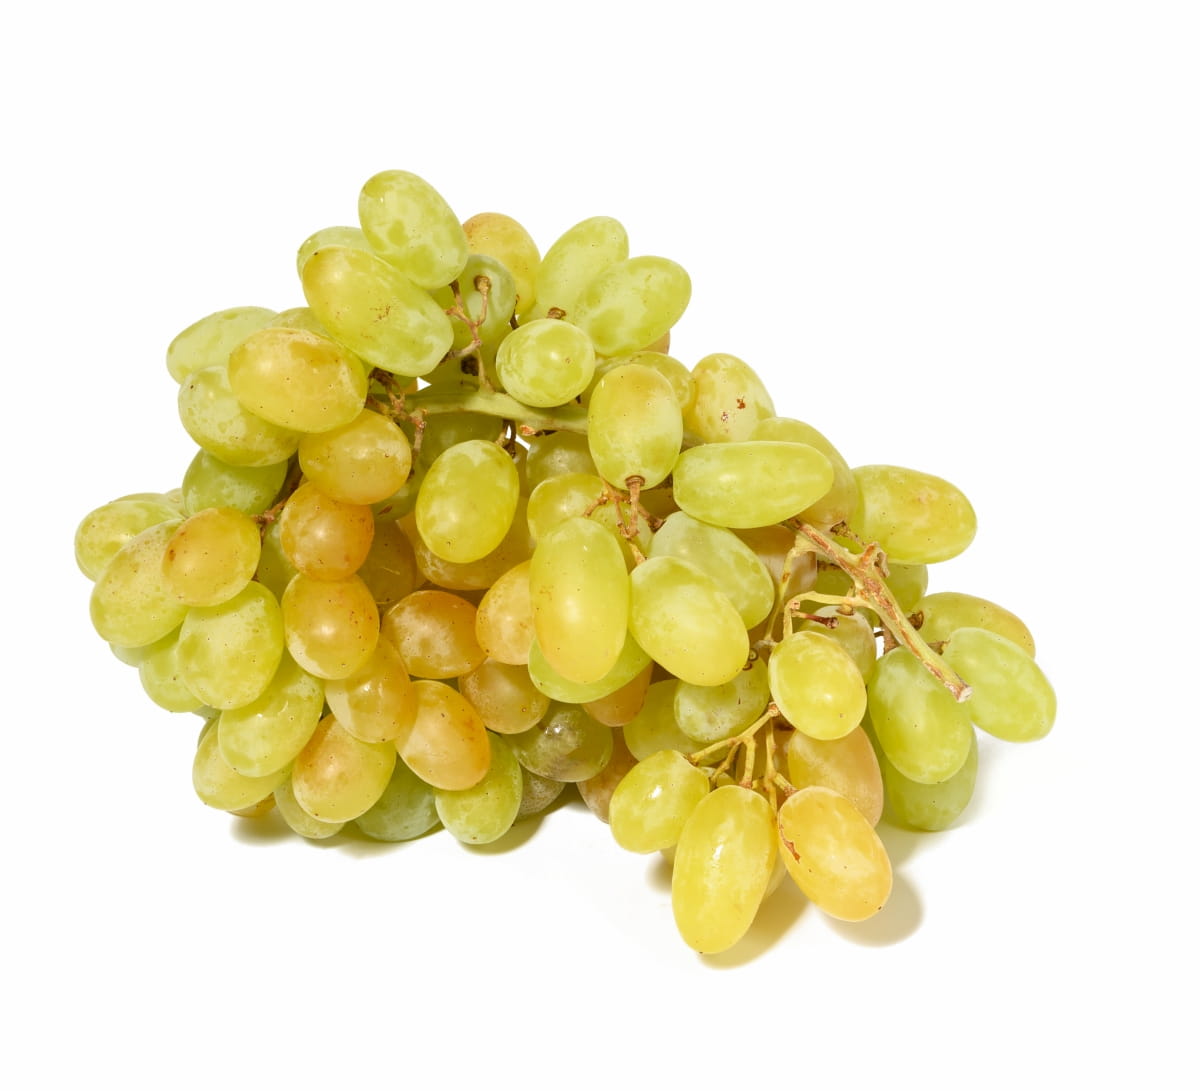 Growing Seedless Grapes
